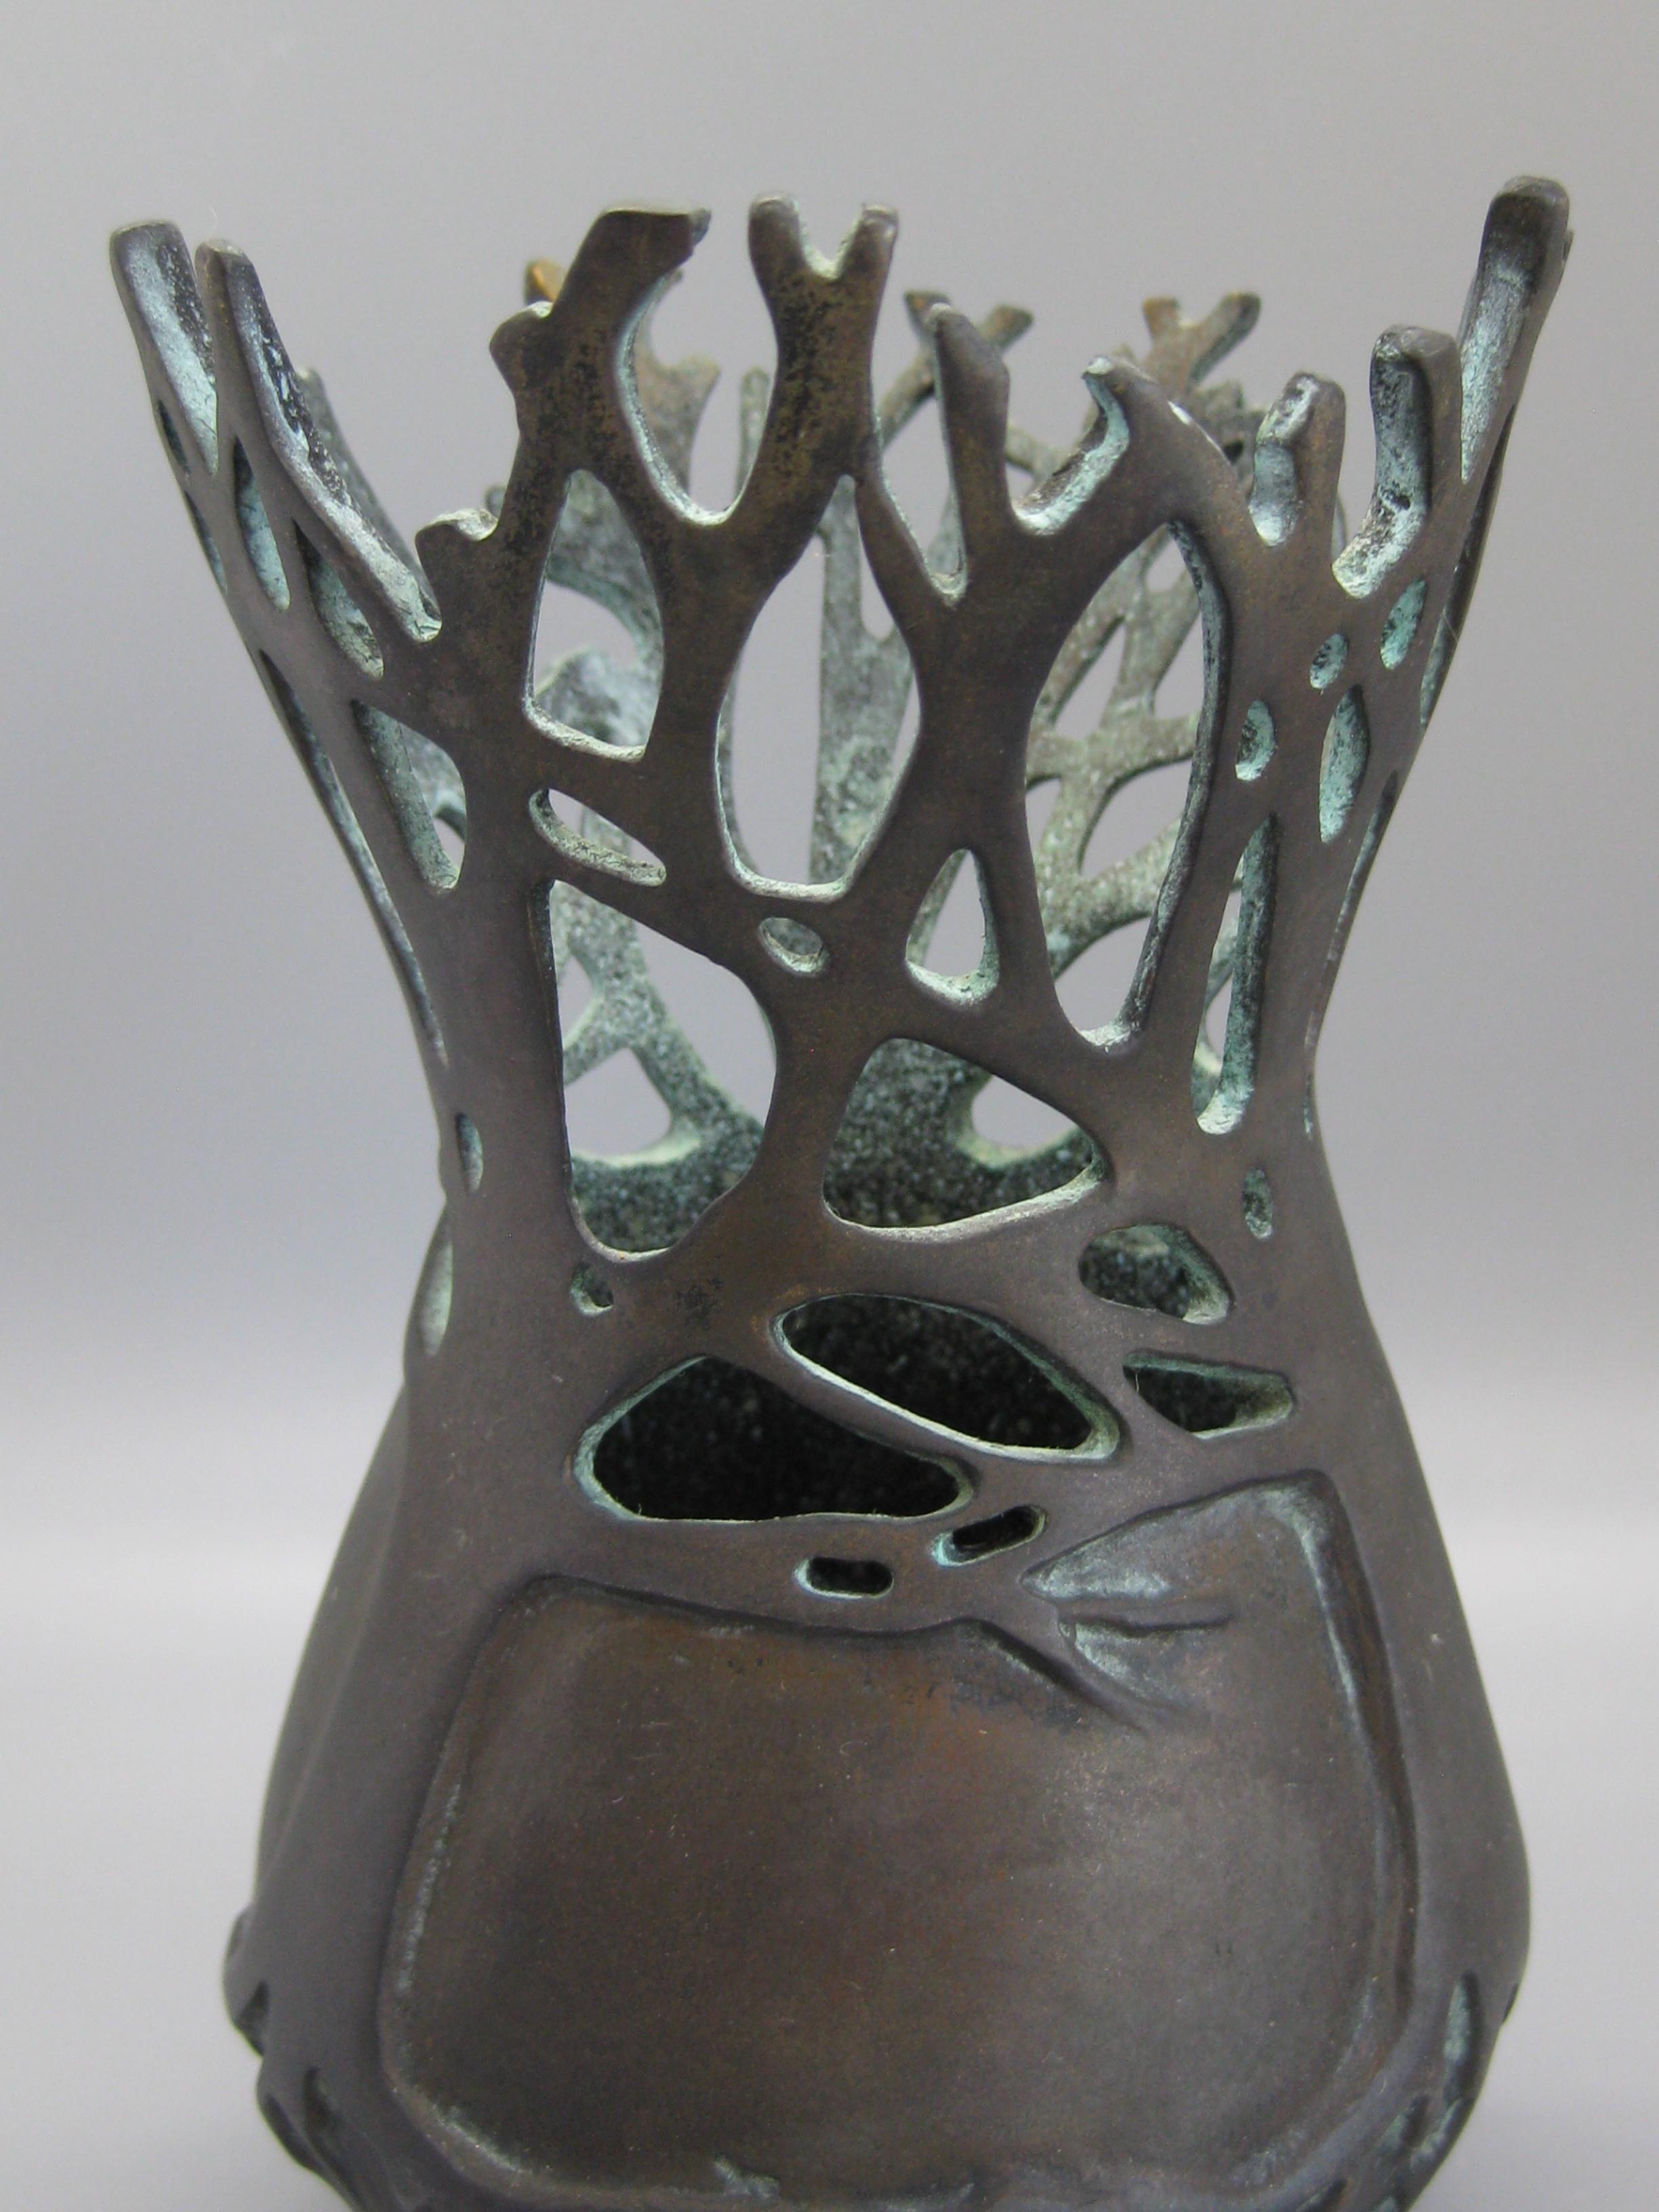 Outstanding bronze vase/vessel sculpture by listed artist Carol Alleman, circa 2001. Low production of only 75 made and this is number 9. Signed on the lower side. Great dark patina and has a wonderful organic form. In excellent shape. Measures: 6